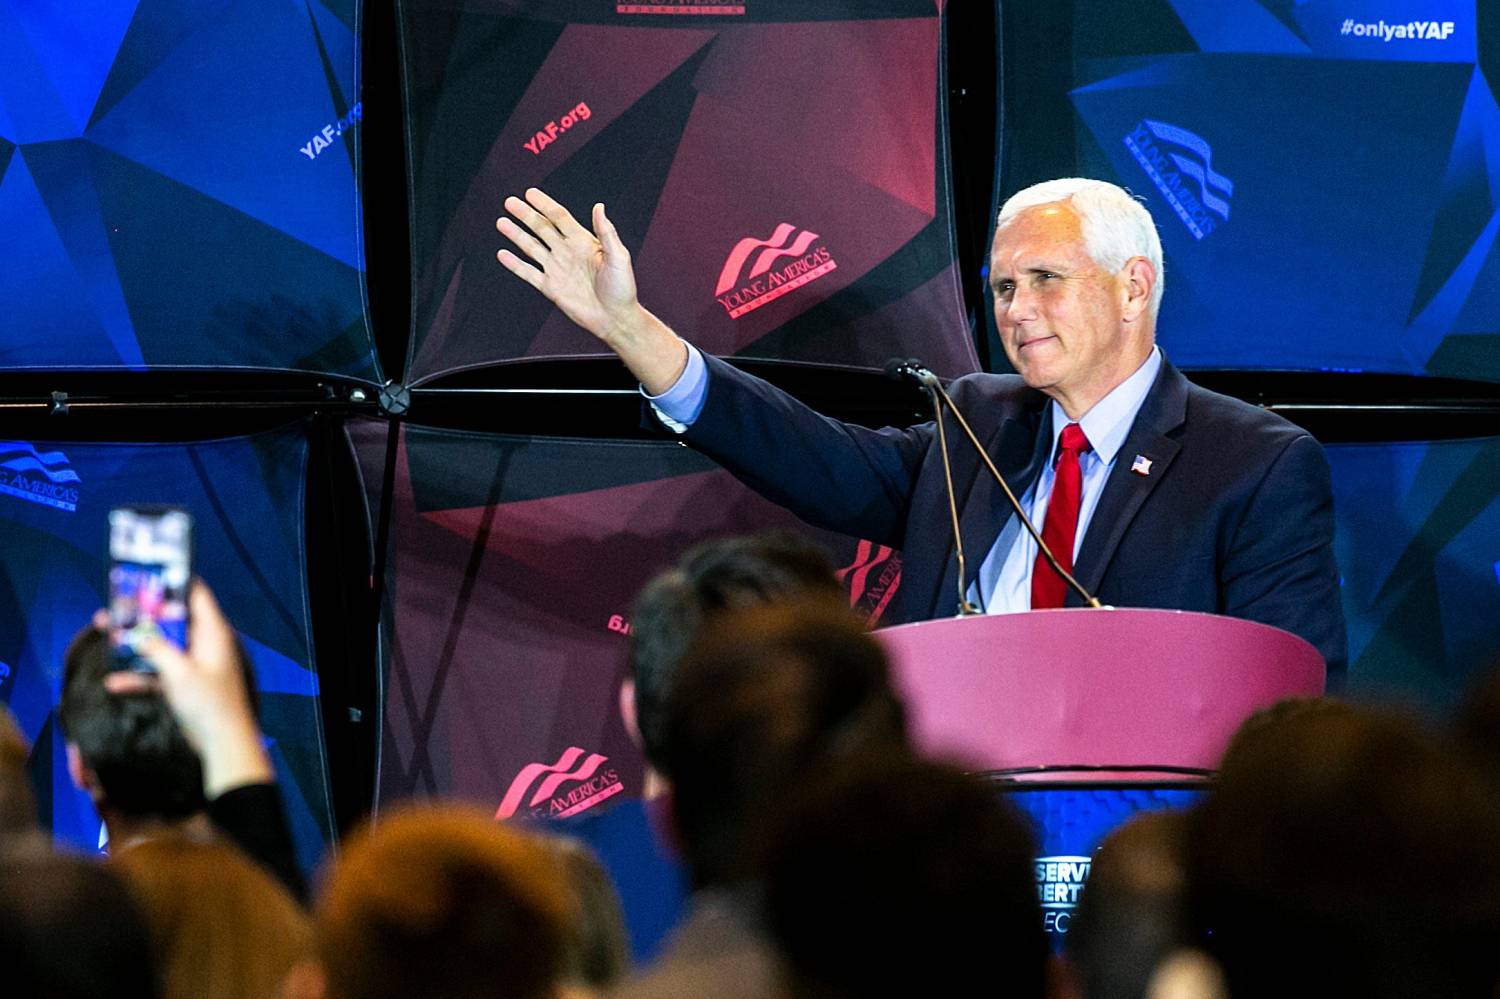 Former Vice President Mike Pence waves as he is introduced during a Young America's Foundation event, "How to Save America from the Woke Left," Monday, Nov. 1, 2021, at the Iowa Memorial Union on the University of Iowa campus in Iowa City, Iowa.211101 Pence Iowa 007 Jpg